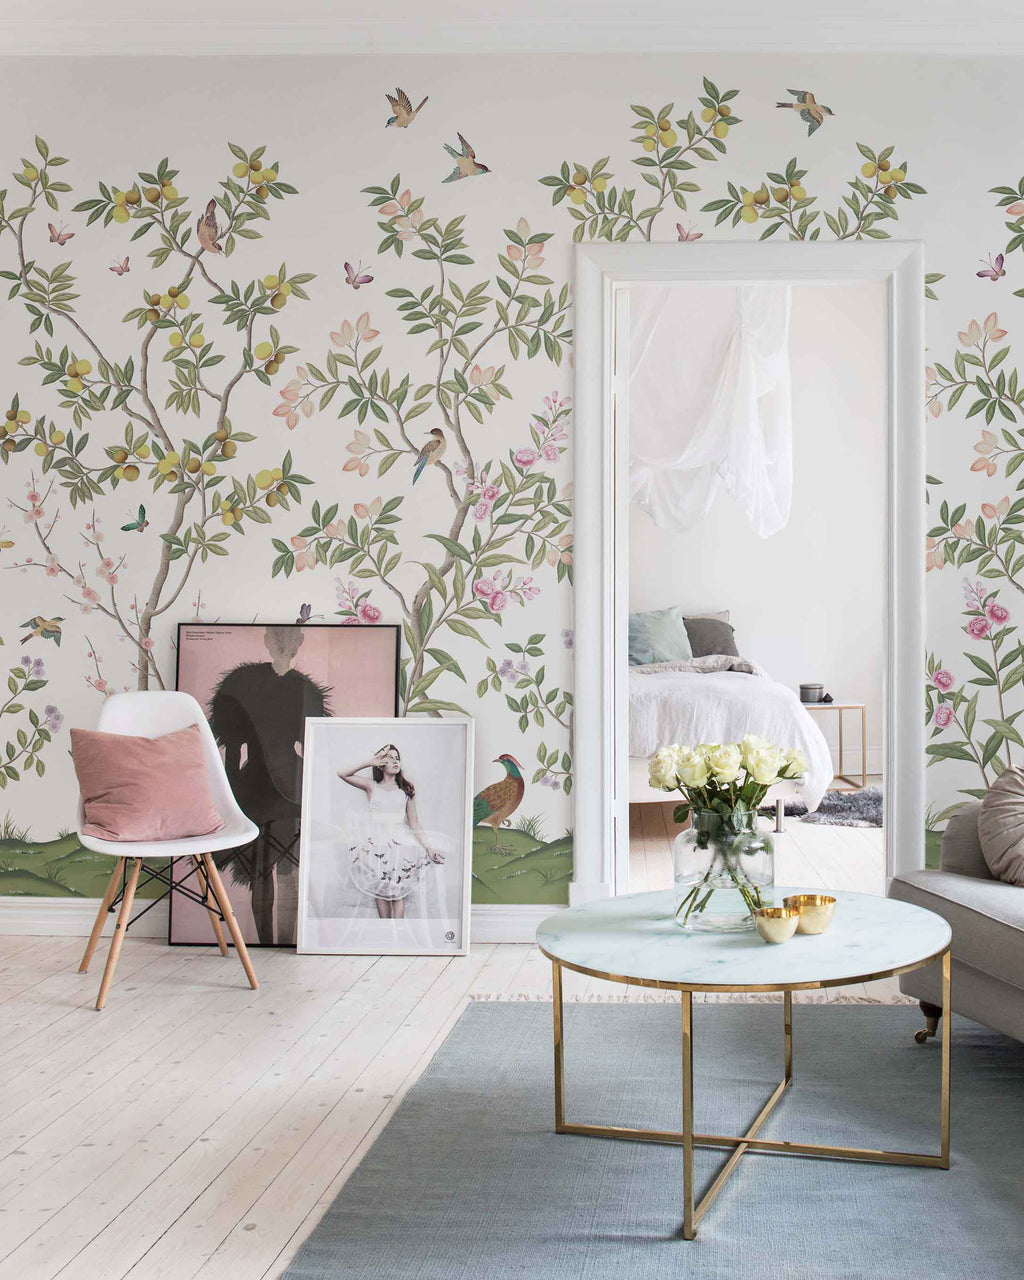 A room wallpapered in Diane Hill's Chinoiserie wallpaper design for Rebel Walls. The design is colourful, with greens, peaches, yellows and pinks on a white background.